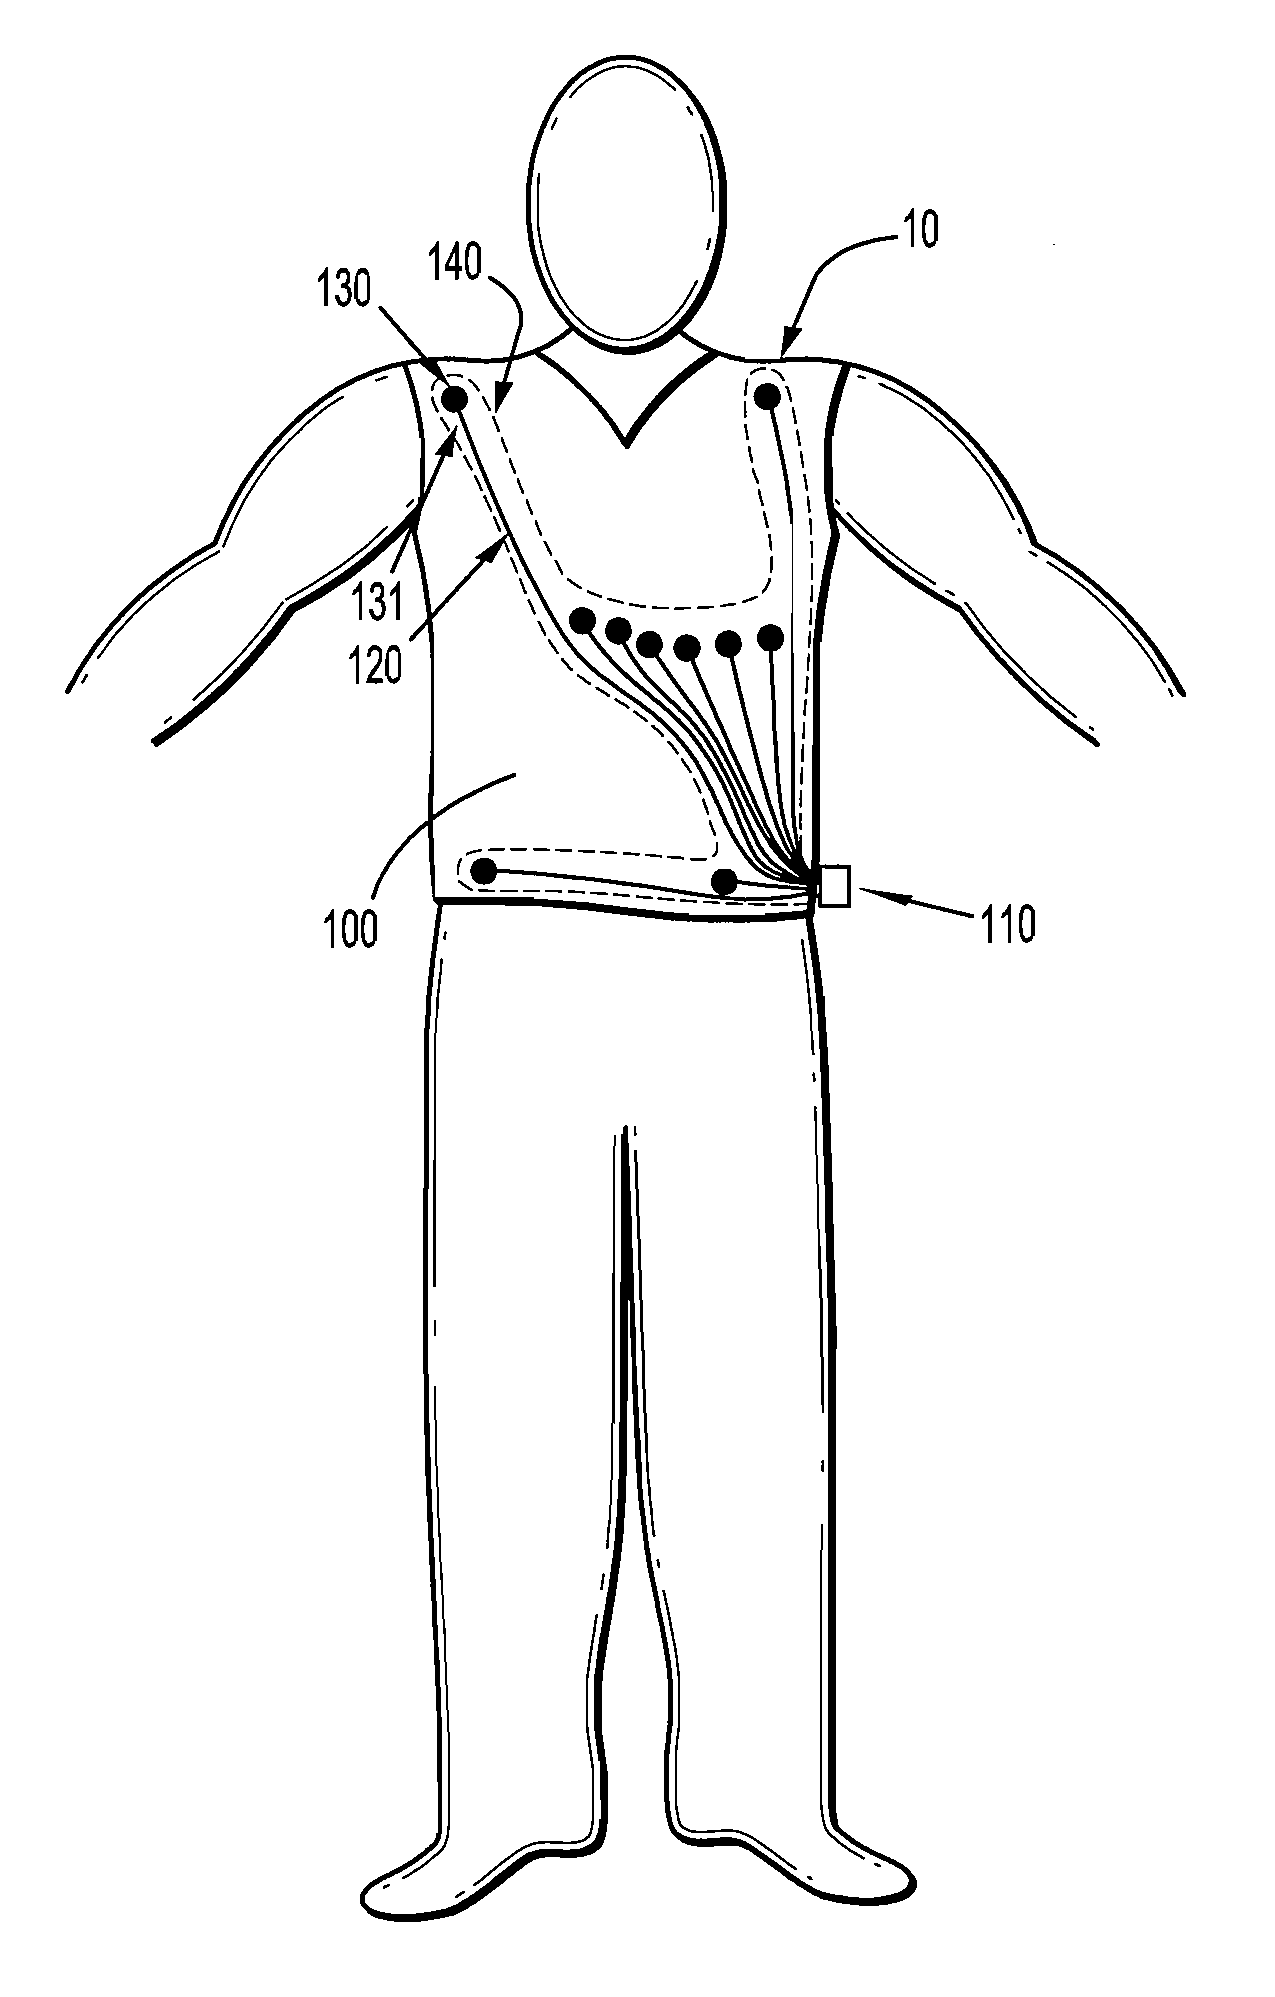 Physiological Sensor Placement and Signal Transmission Device